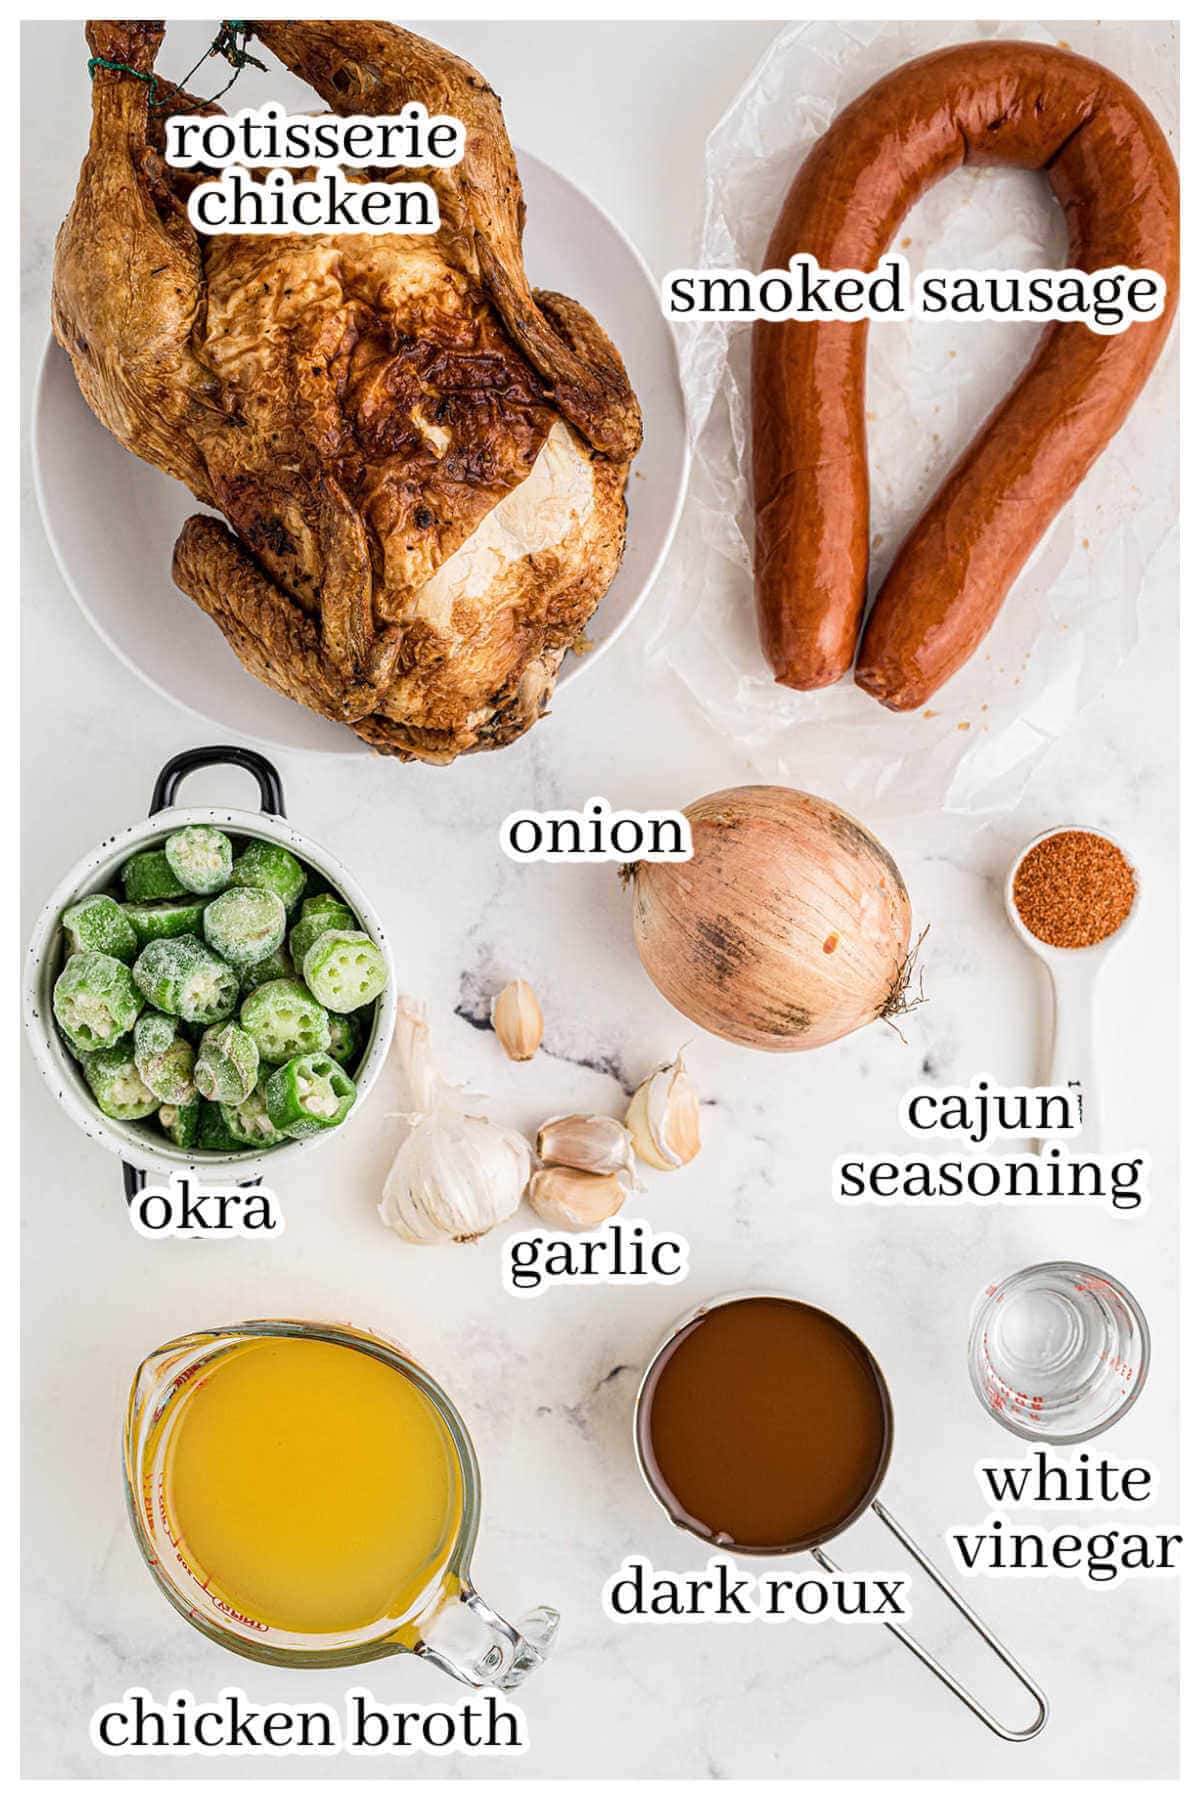 Ingredients to make the slow cooker recipe, with print overlay.